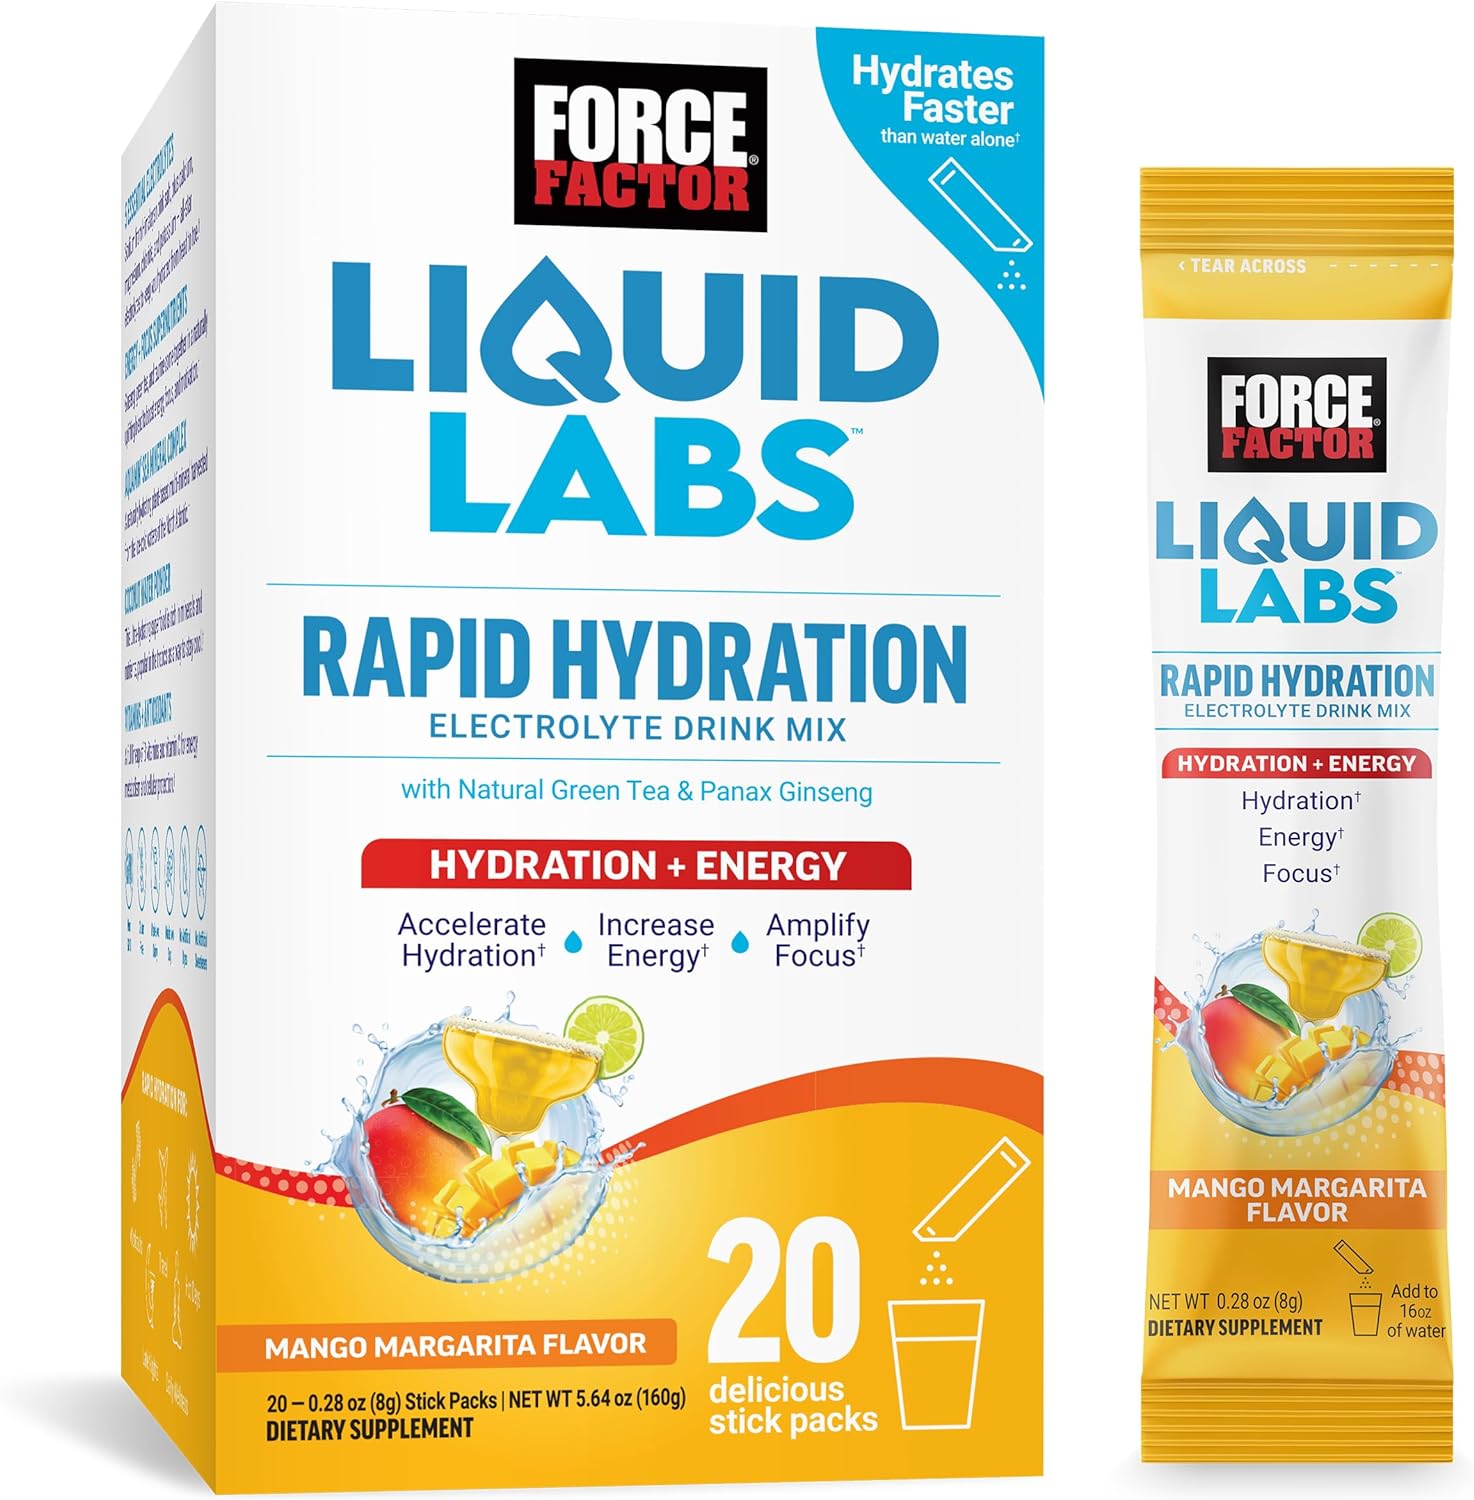 FORCE FACTOR Liquid Labs Energy Drink, Electrolytes Powder, Hydration Packets to Boost Energy & Focus, 5 Essential Electrolytes, Vitamins, Minerals, & Antioxidants, Mango Margarita, 20 Stick Packs